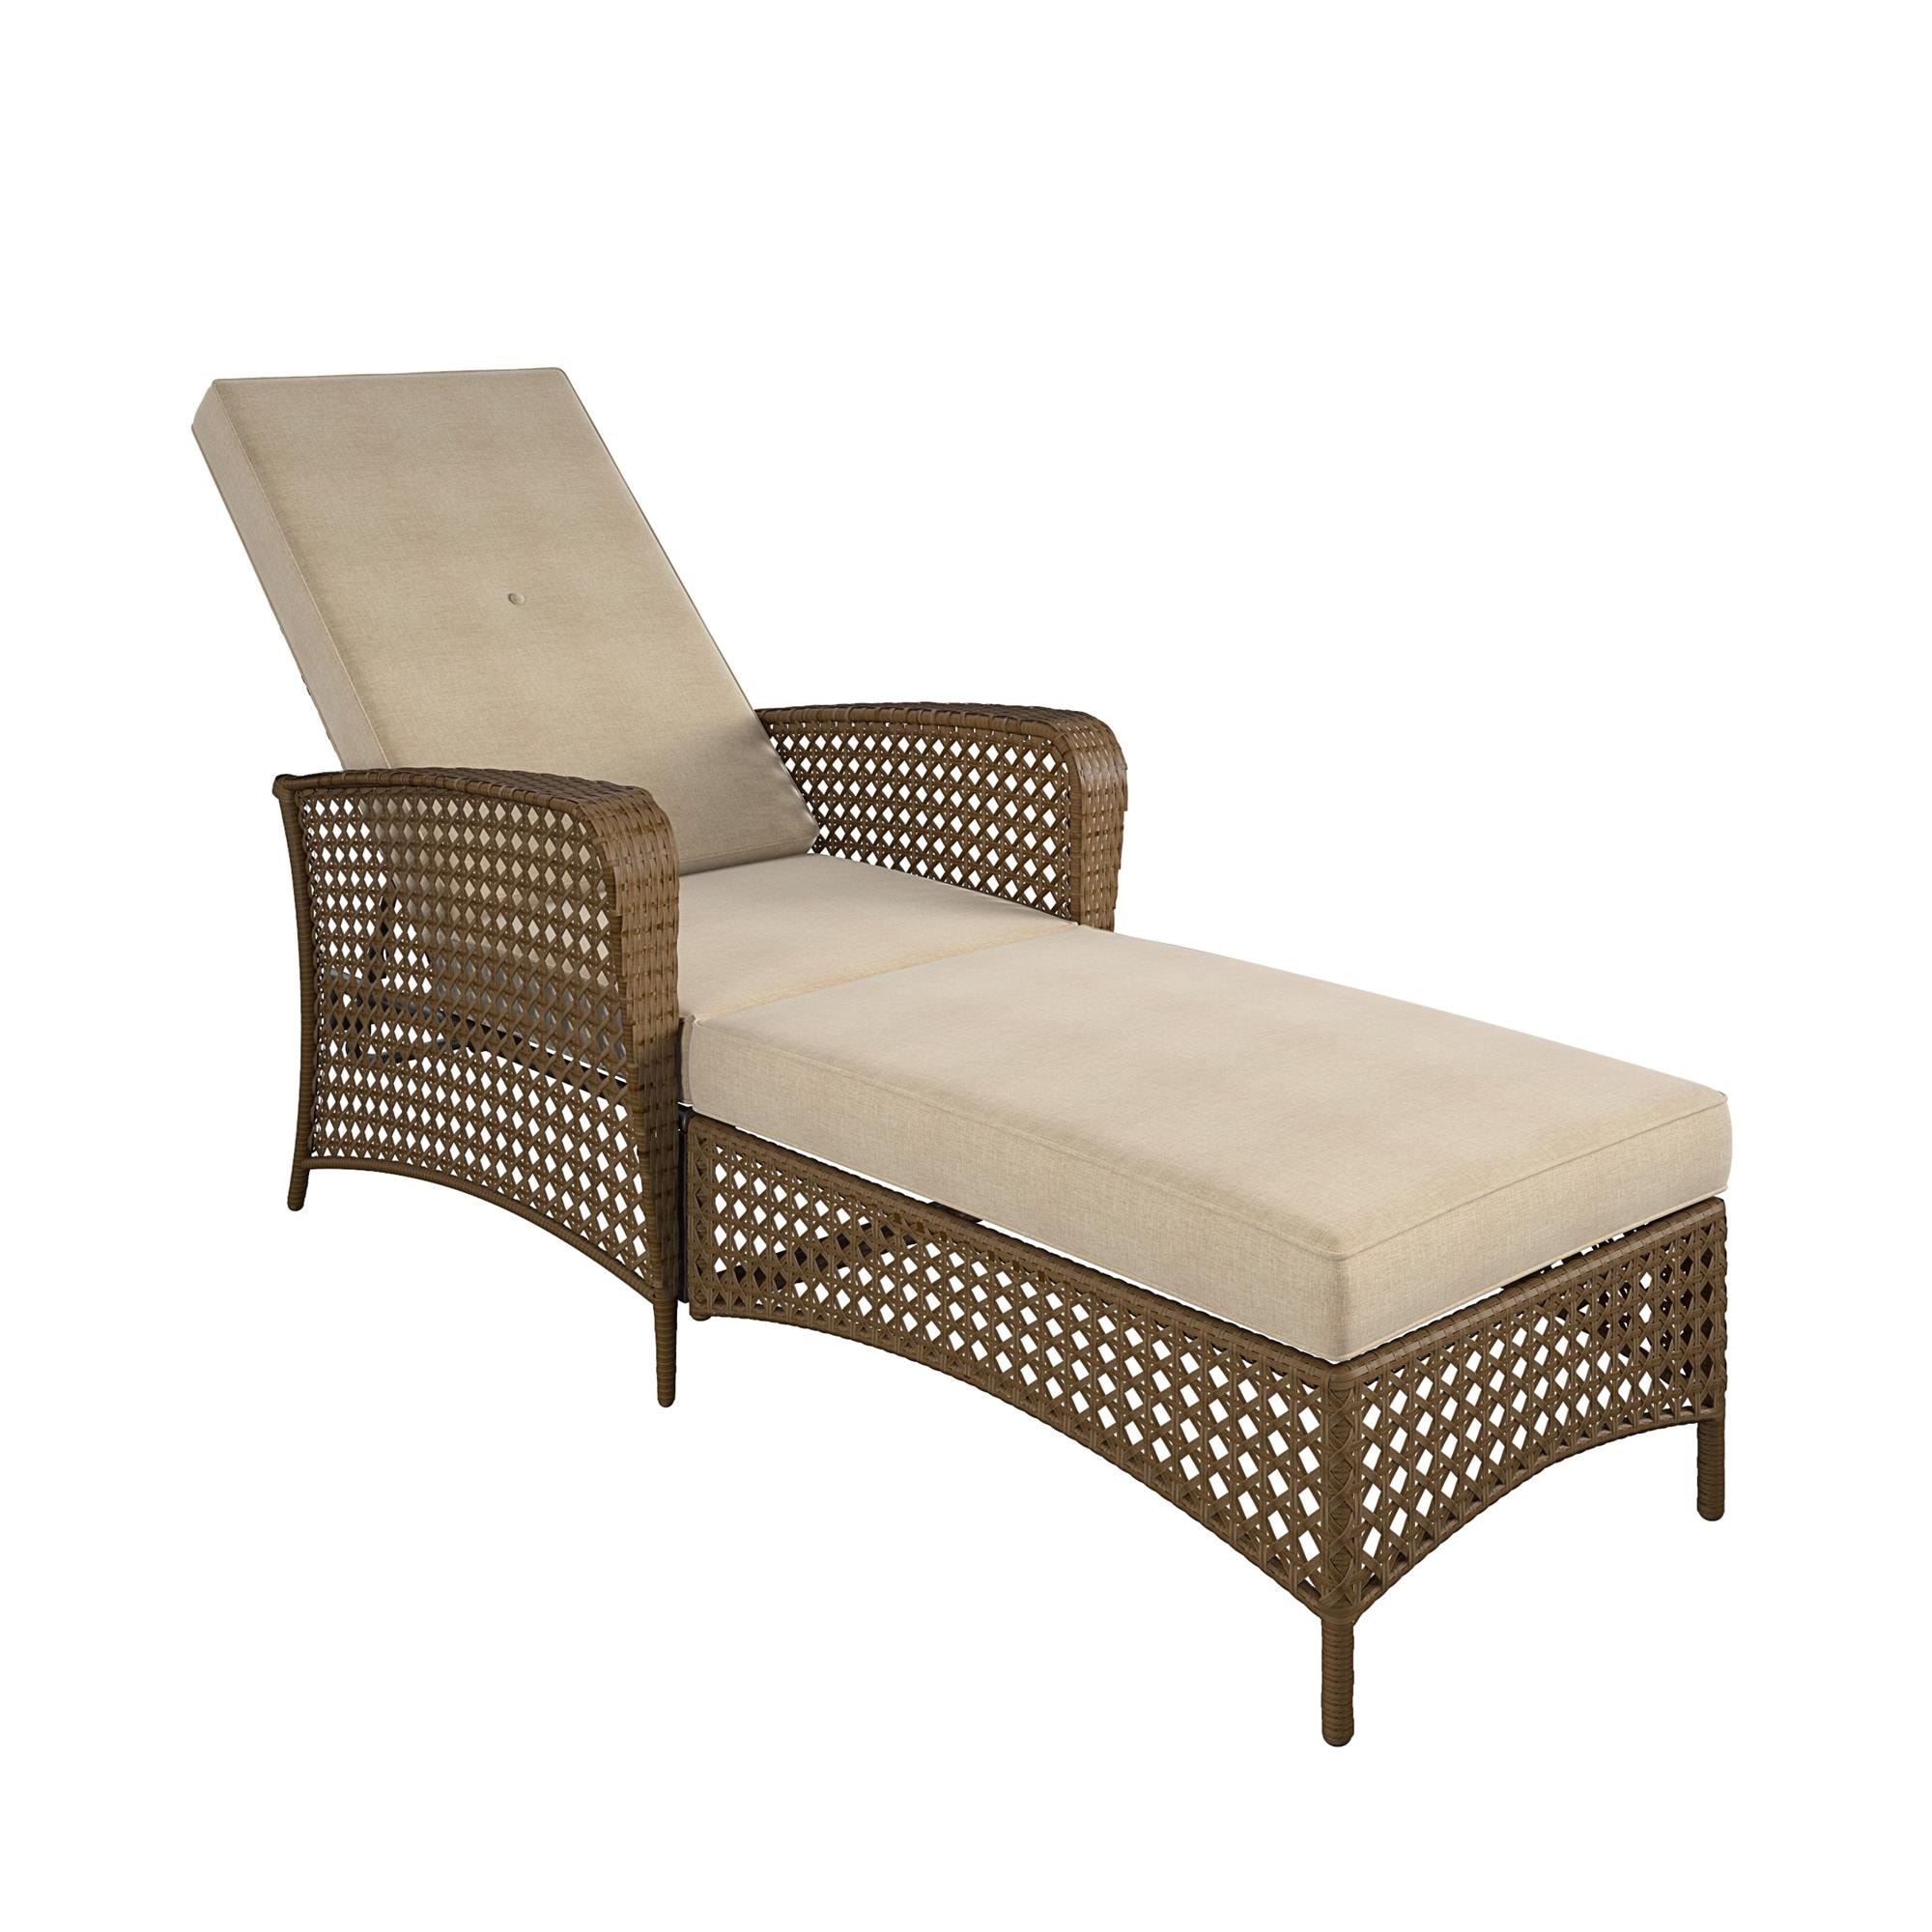 Cosco Lakewood Ranch Steel Woven Wicker Outdoor Chaise Lounge